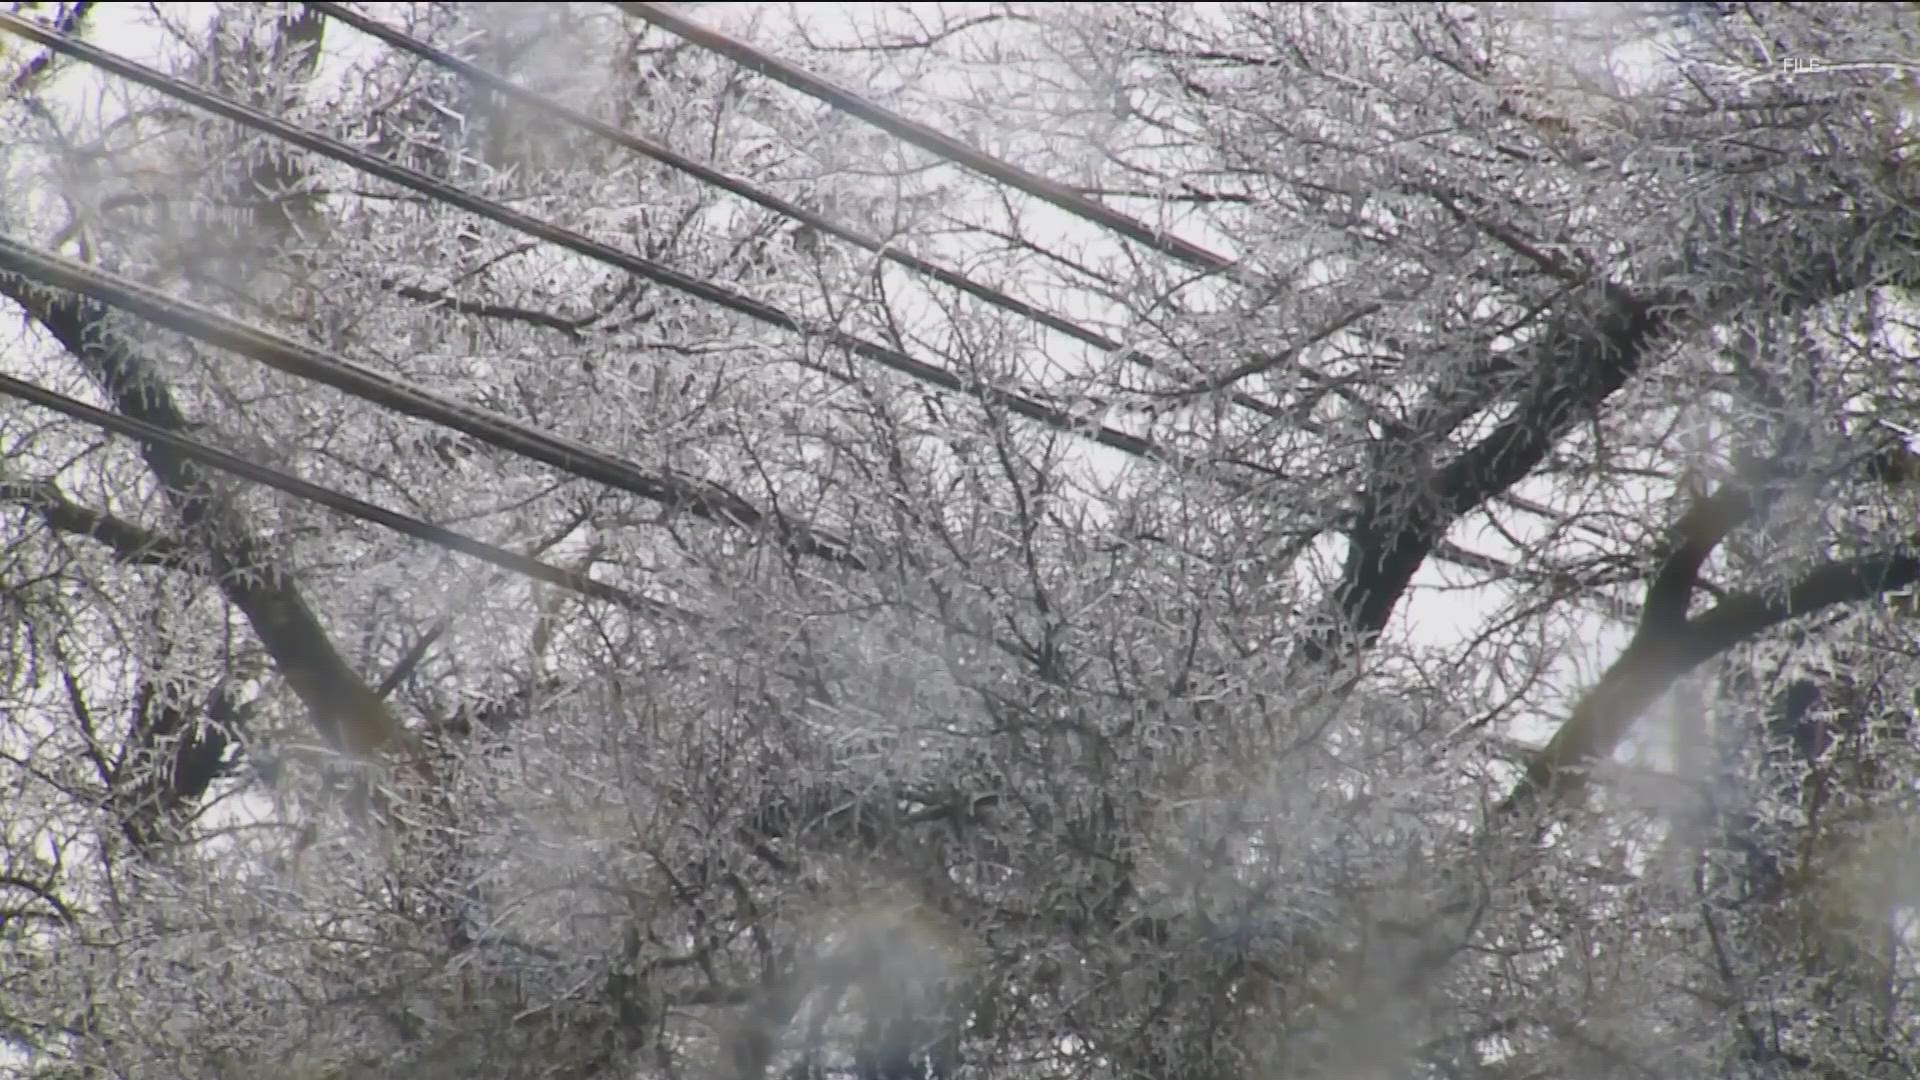 Austin Energy may soon have more tree trimming companies working to clear powerline paths. This comes after a recent ice storm left thousands in the dark.